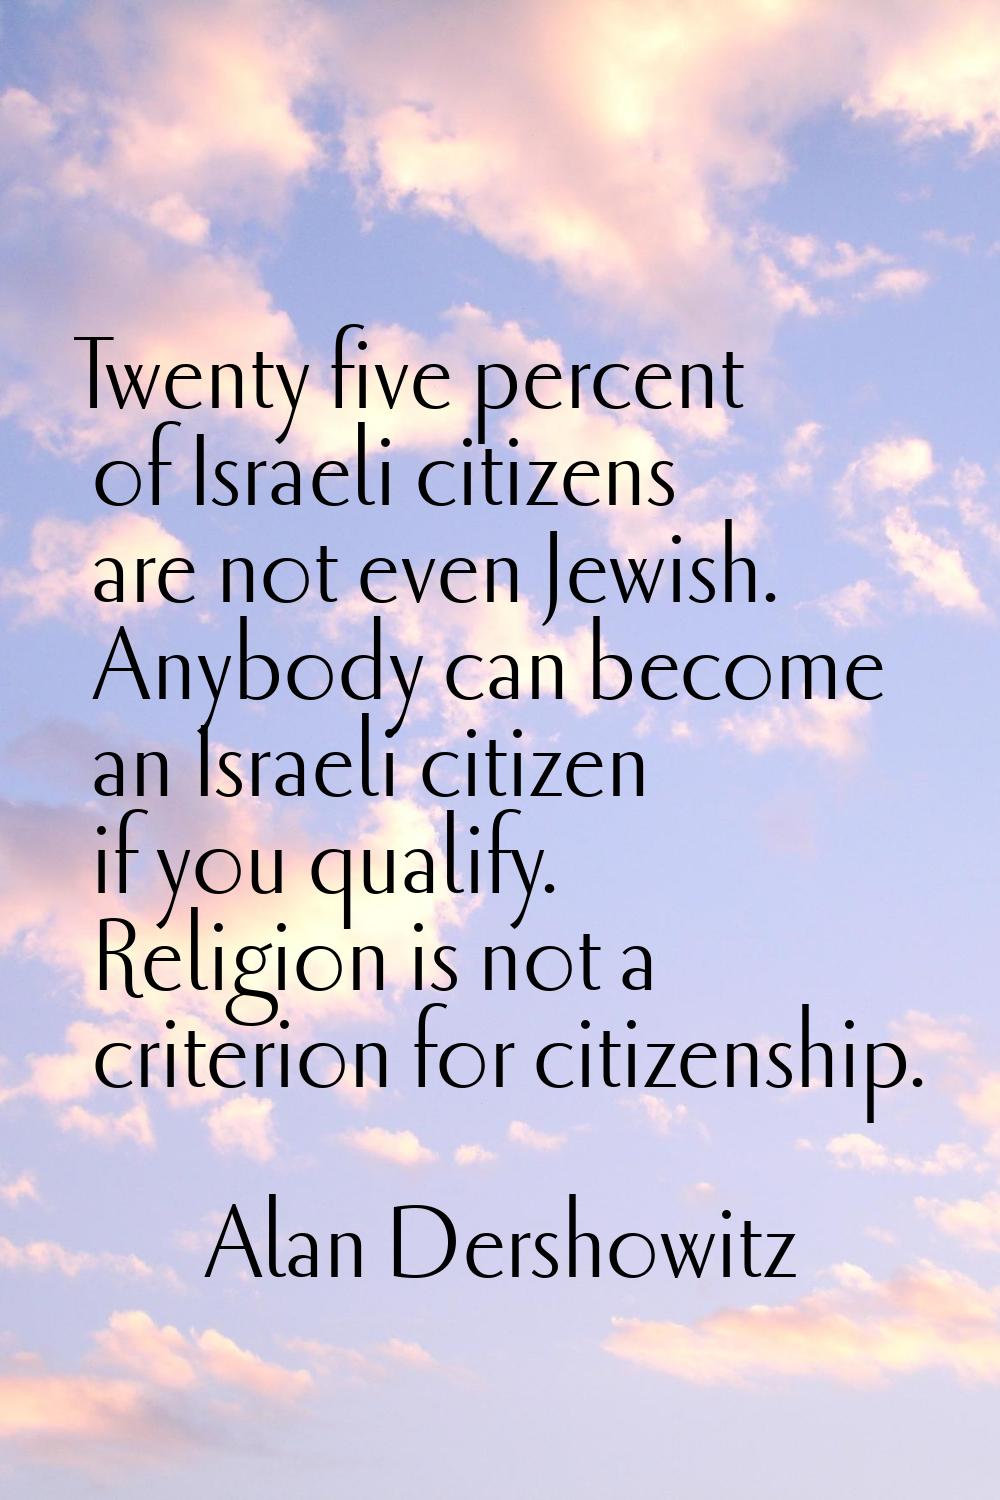 Twenty five percent of Israeli citizens are not even Jewish. Anybody can become an Israeli citizen 